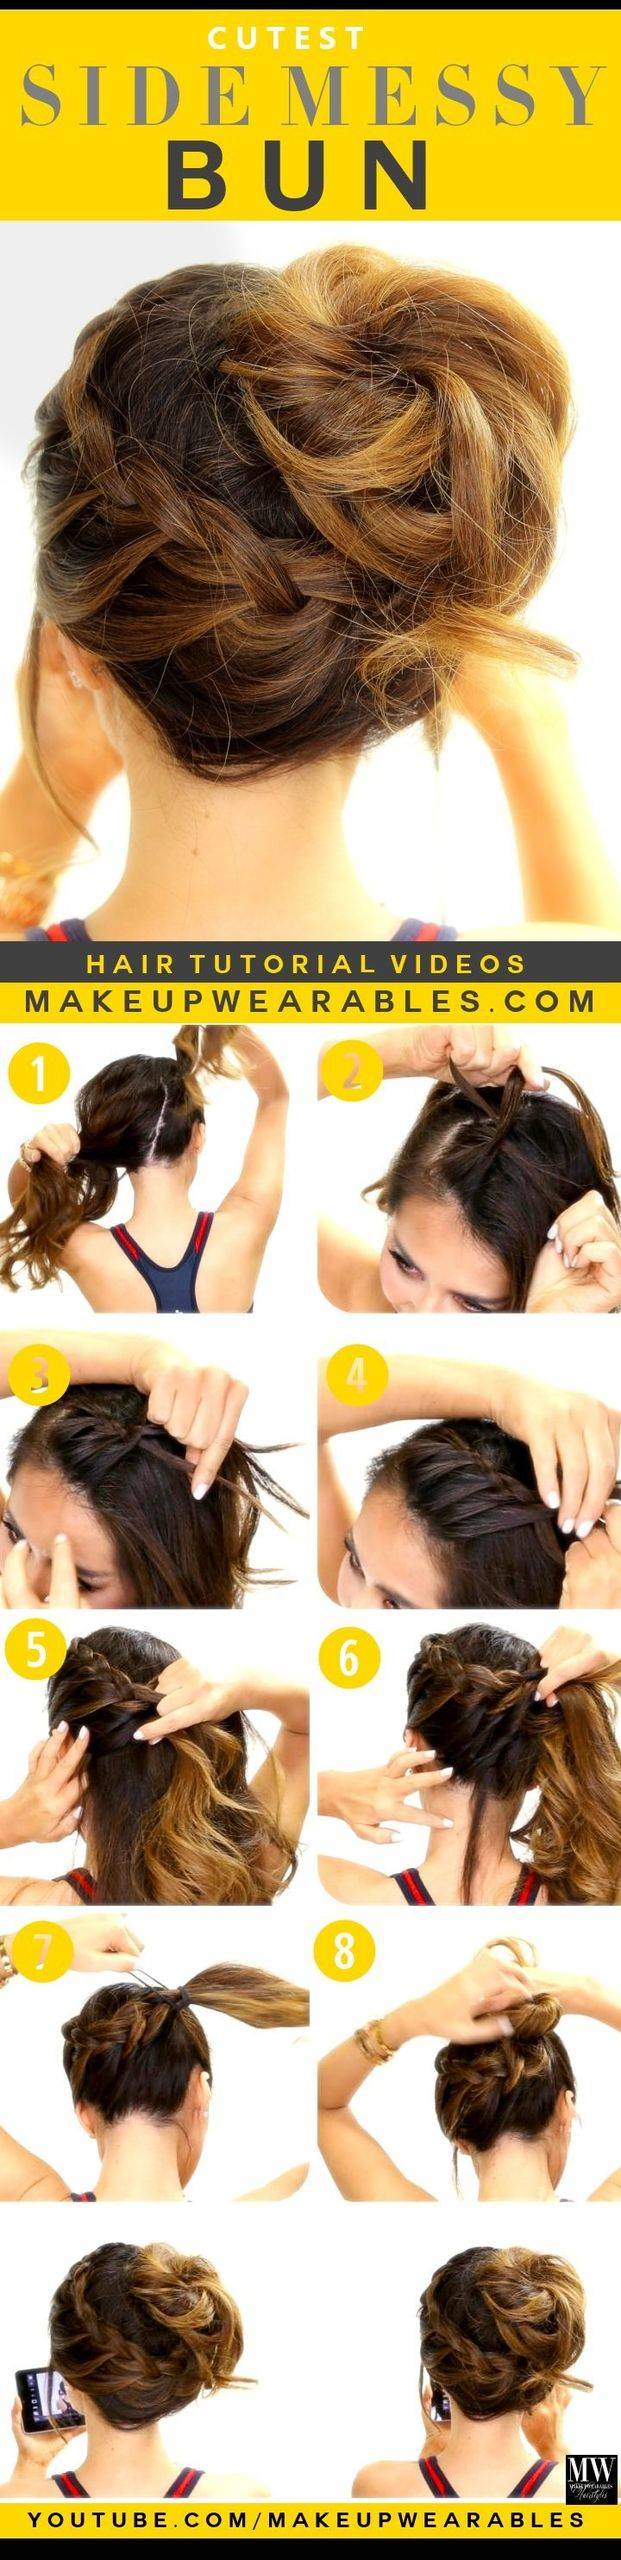 https://image.sistacafe.com/images/uploads/content_image/image/47618/1445011121-27-30-Messy-Braid-Hairstyles-That-You-Will-Love.jpg